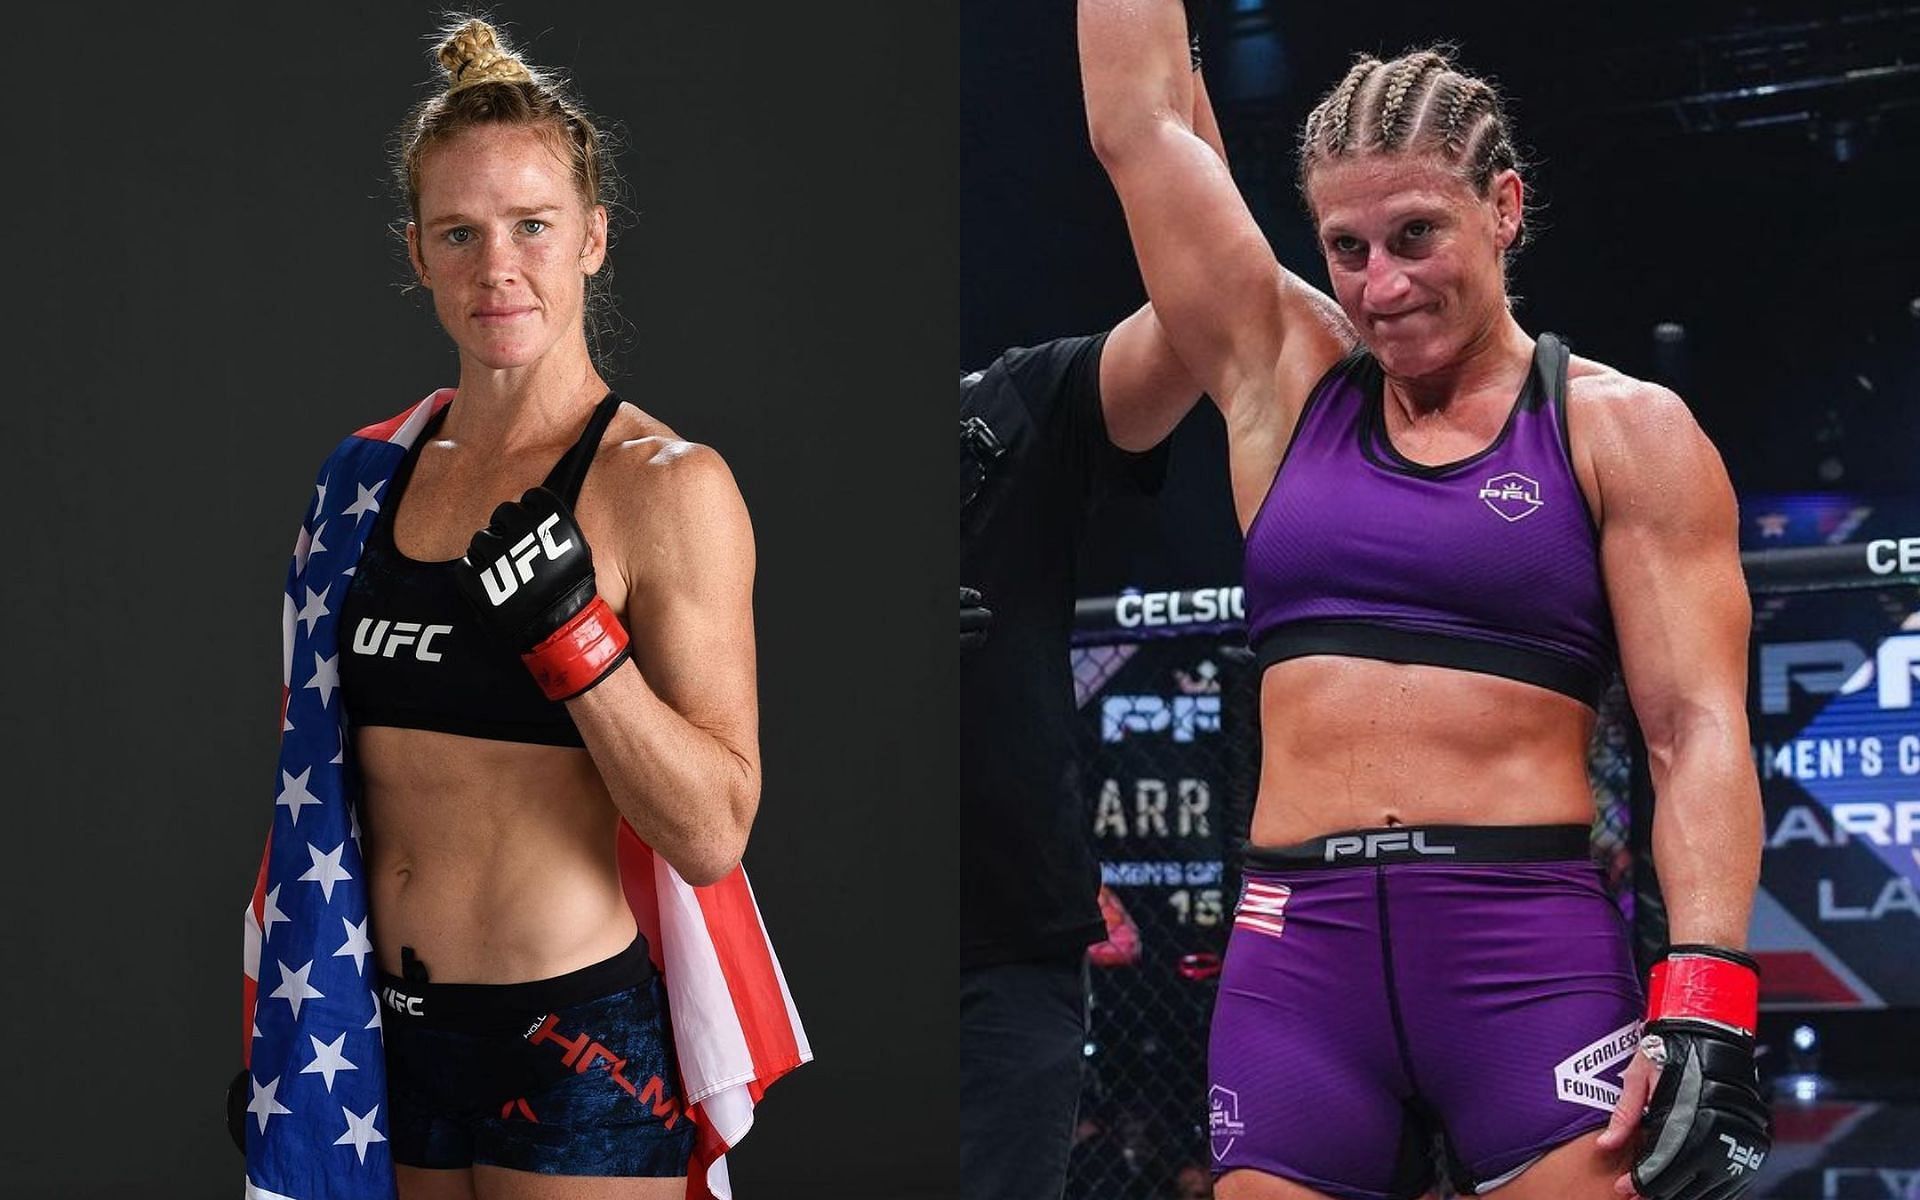 Holly Holm (left) and Kayla Harrison (right) (Images courtesy @hollyholm and @kaylharrisonofficial on Instagram)